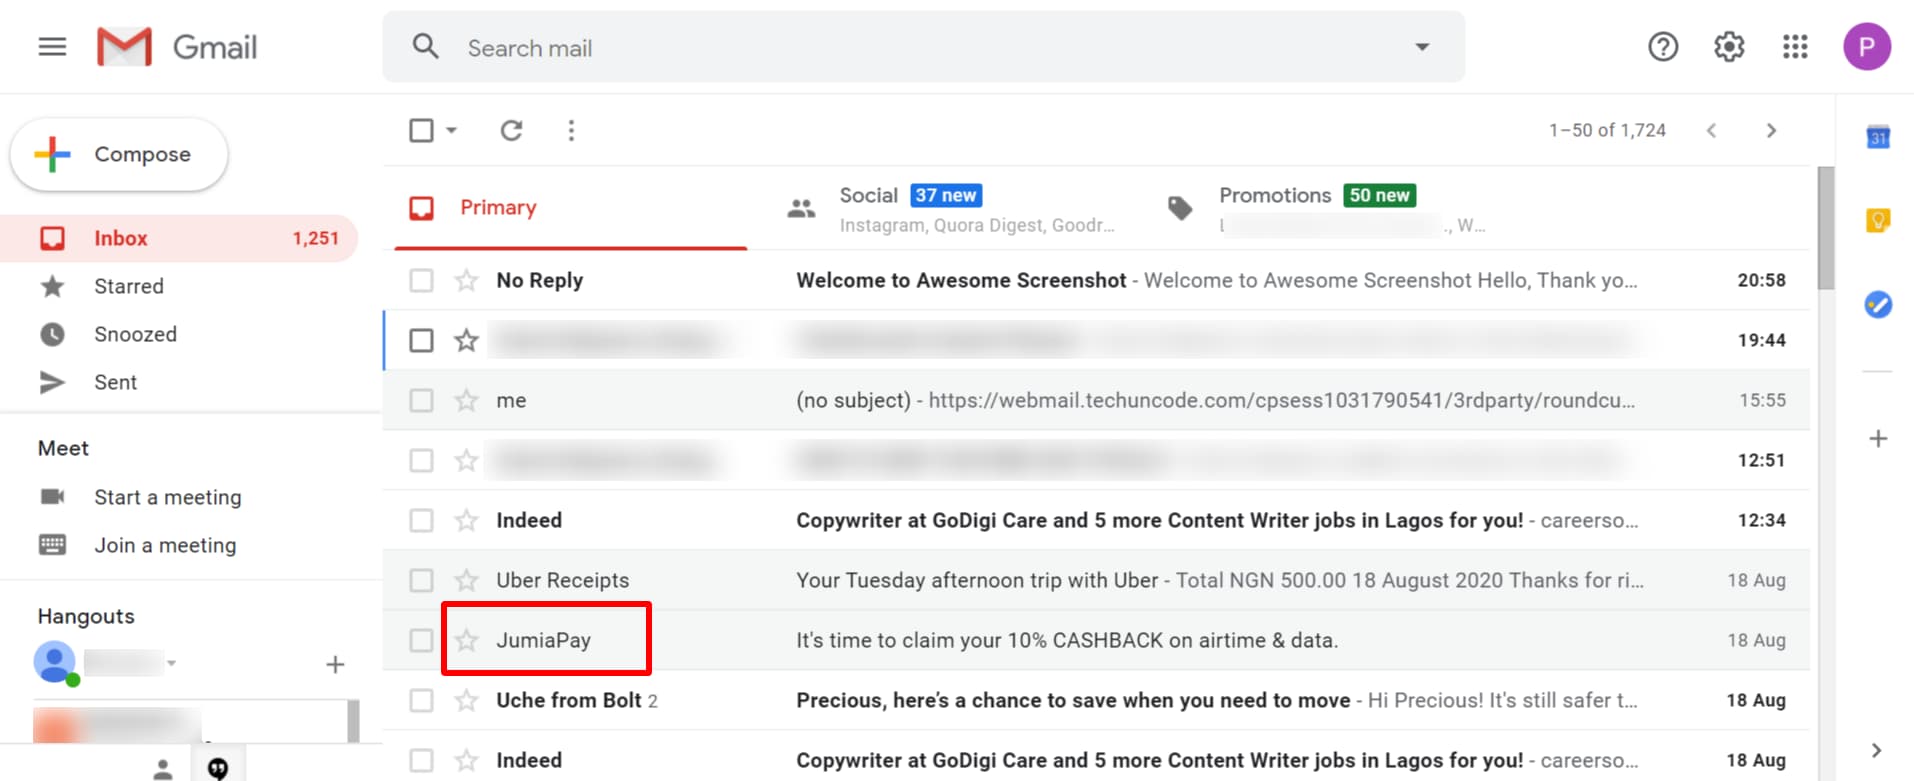 how to block email on gmail